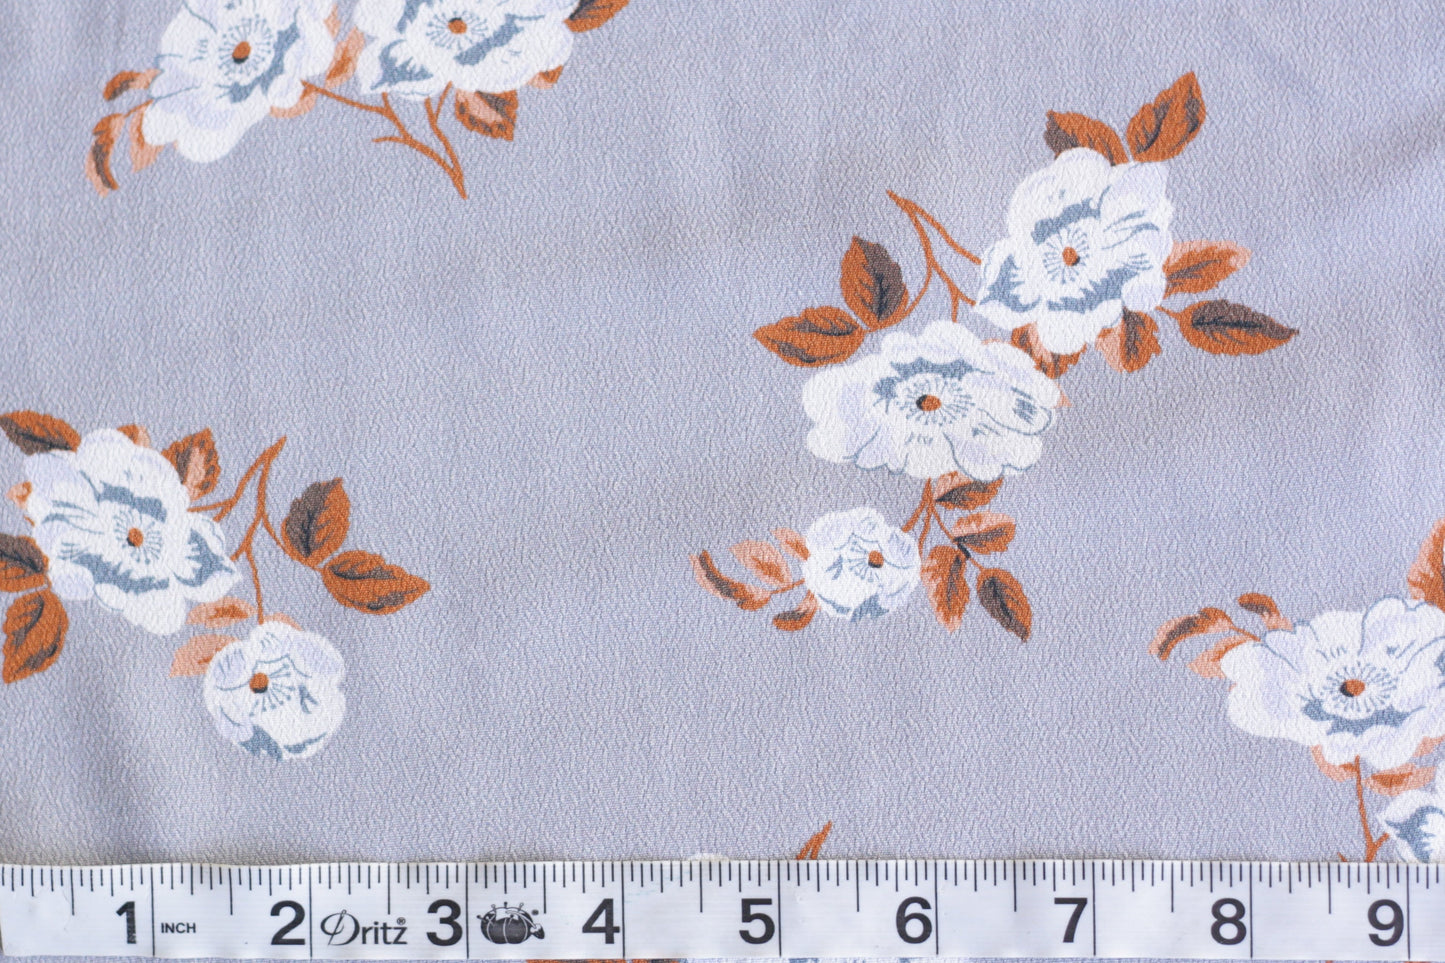 Rayon Crepe - Blue Gray Floral (2 yard remnant)